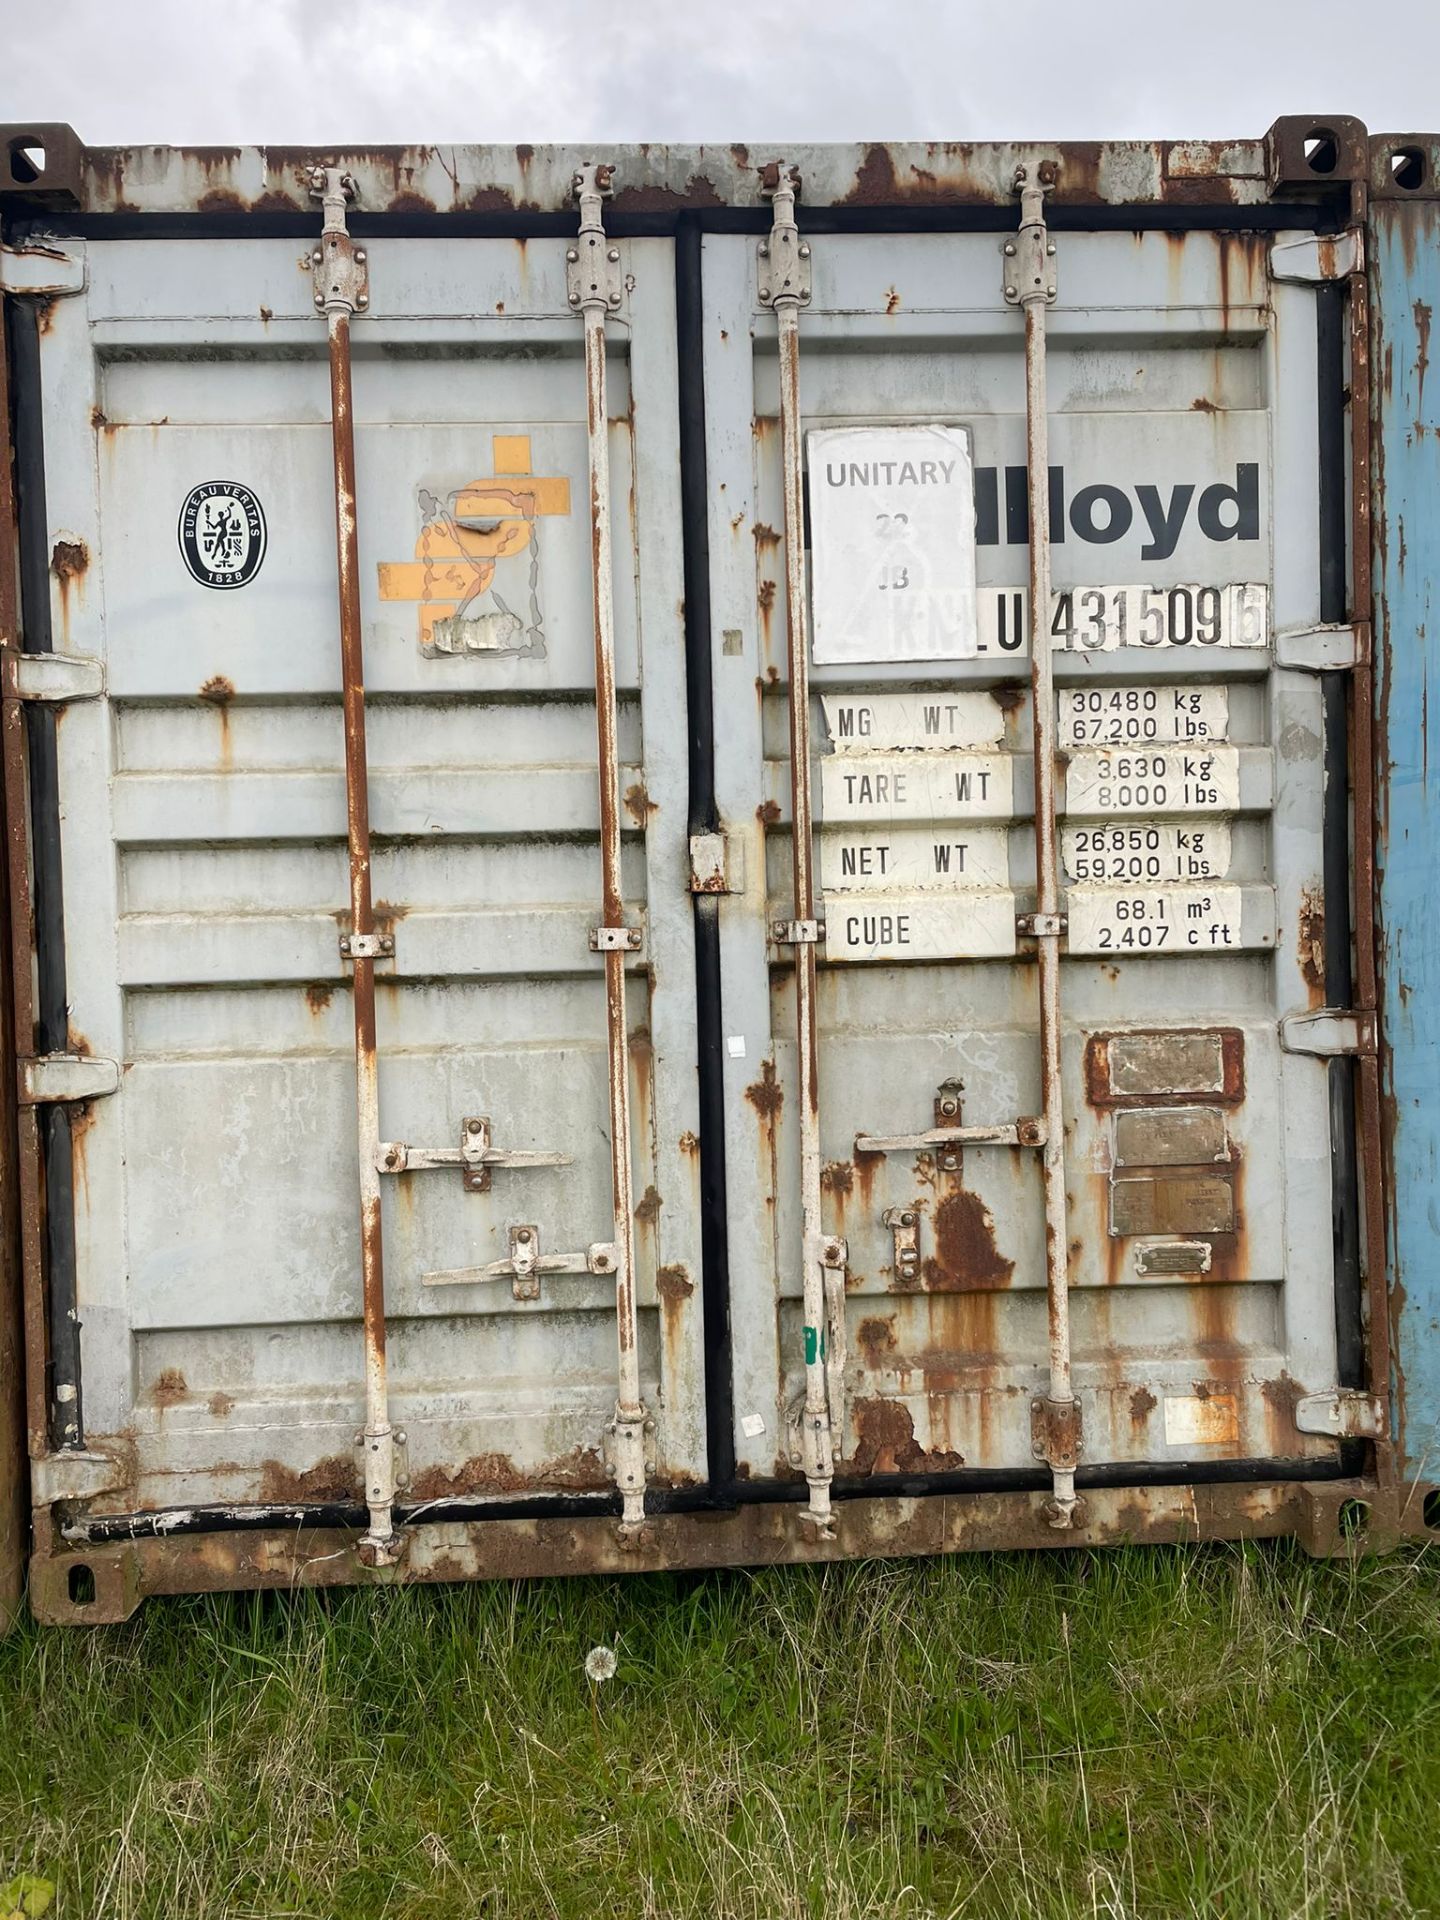 Shipping Container - ref KNLU4315096 - NO RESERVE (40’ GP - Standard)